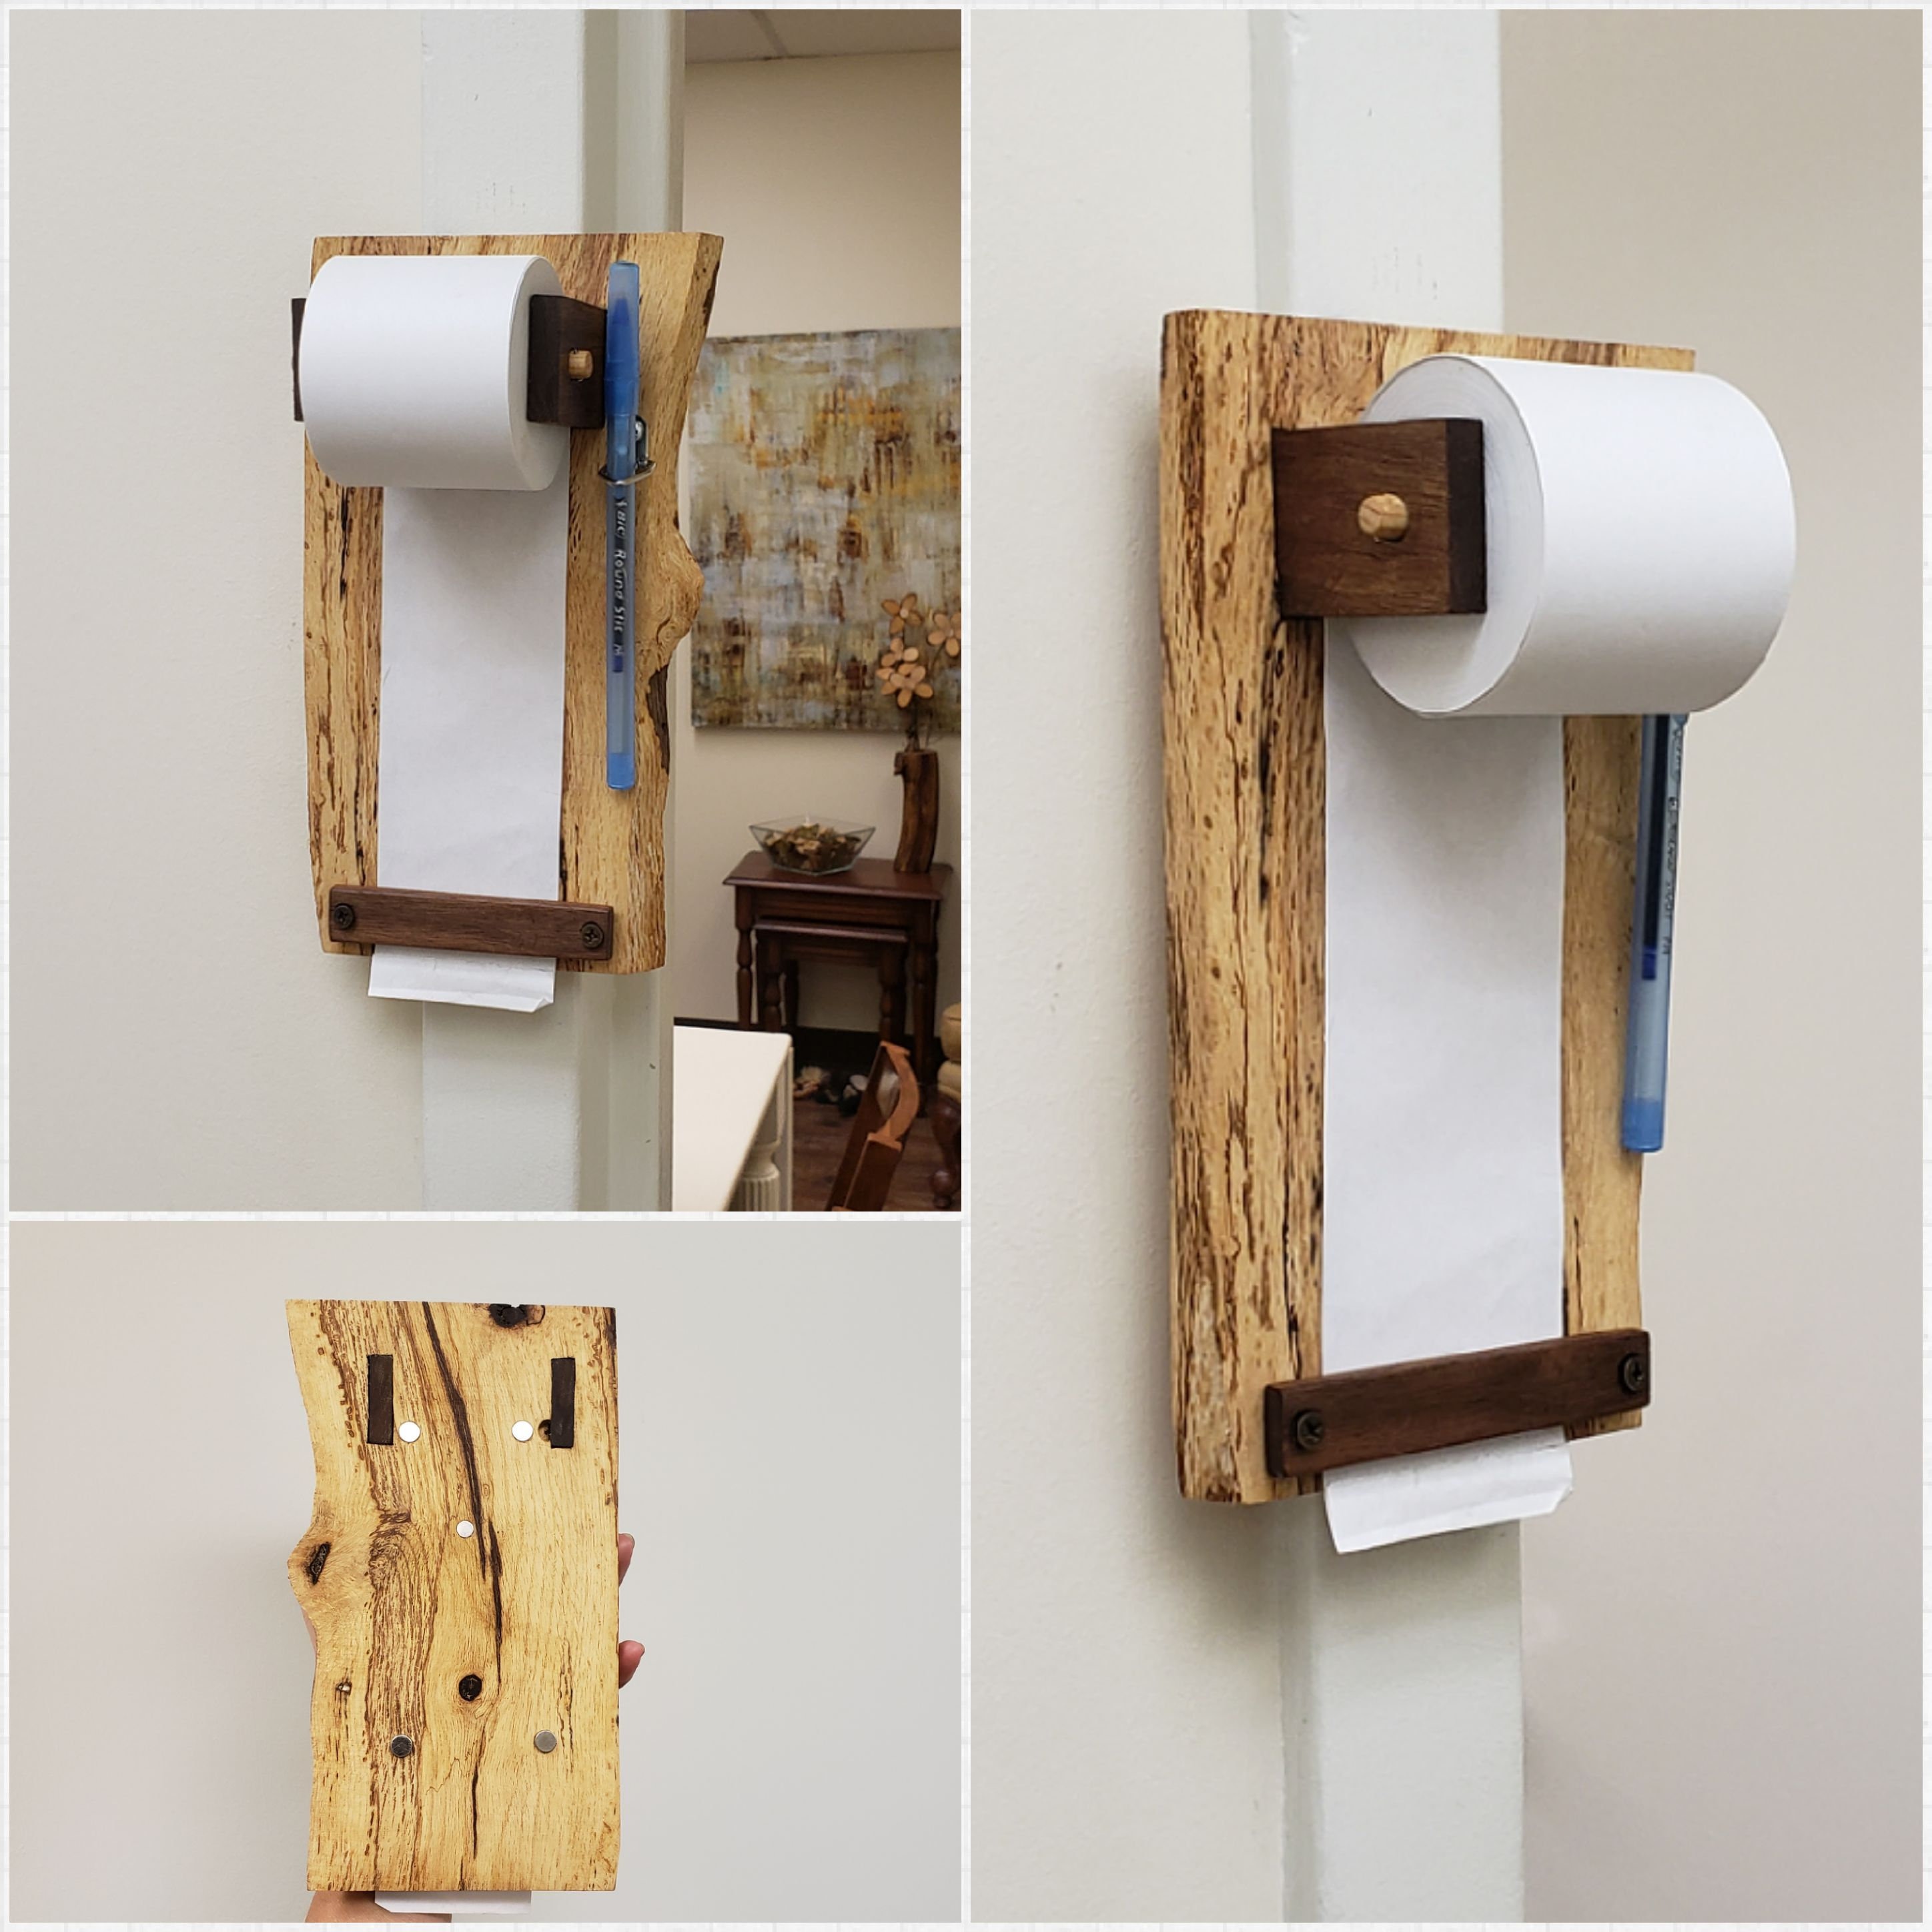 Wall Mounted Note Paper Dispenser with a 160 foot roll of paper